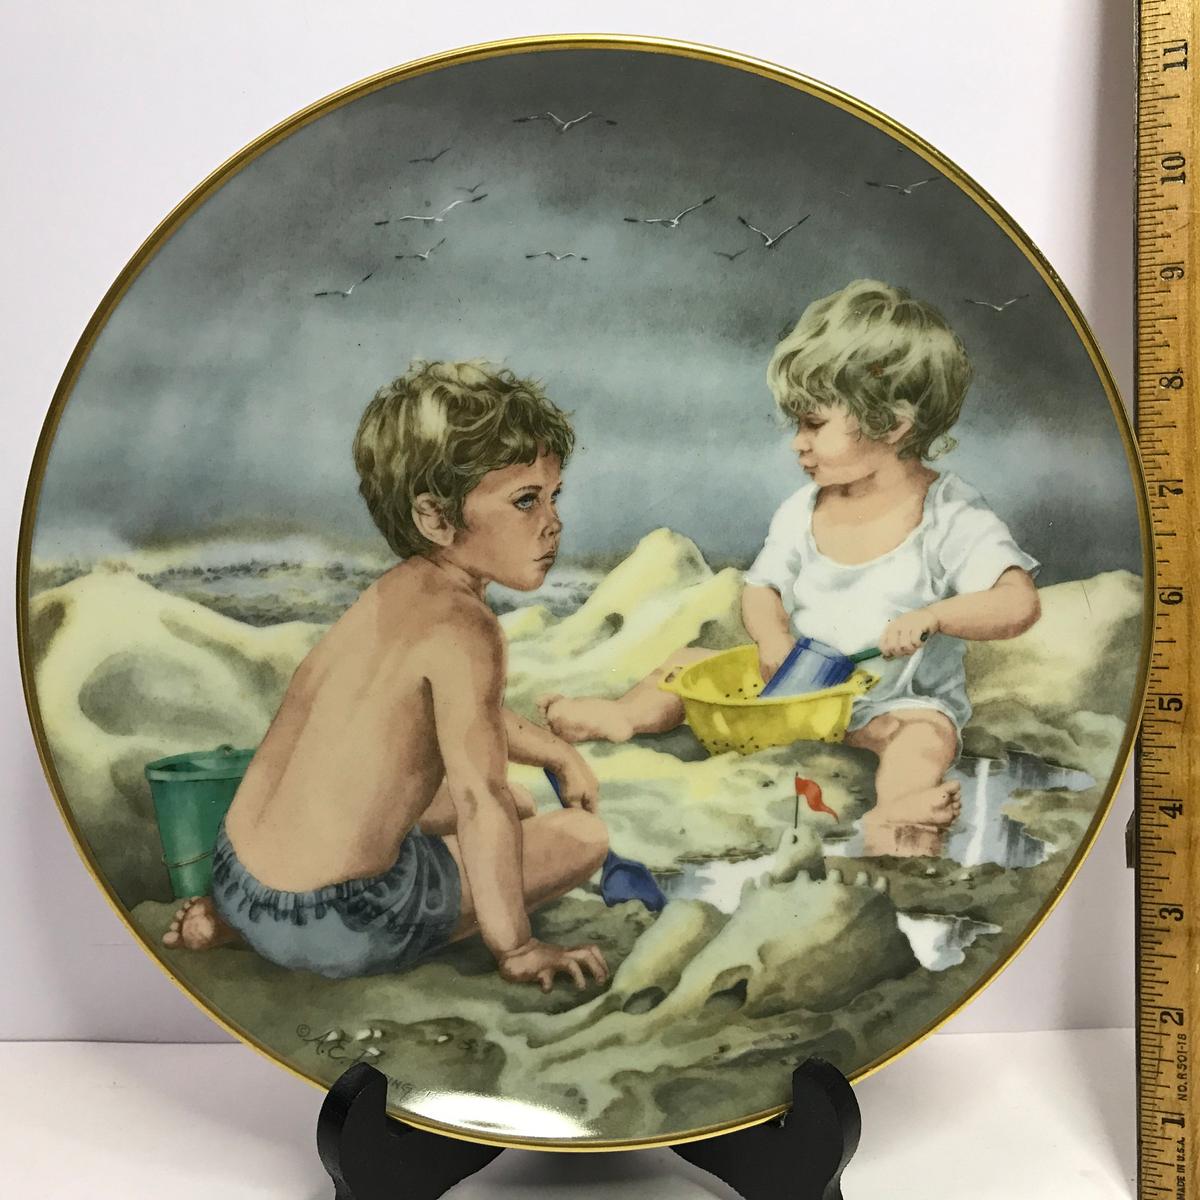 Danbury Mint "Journey of Dreams" by A.E. Ruffing "Dream Castles" Collector's Plate